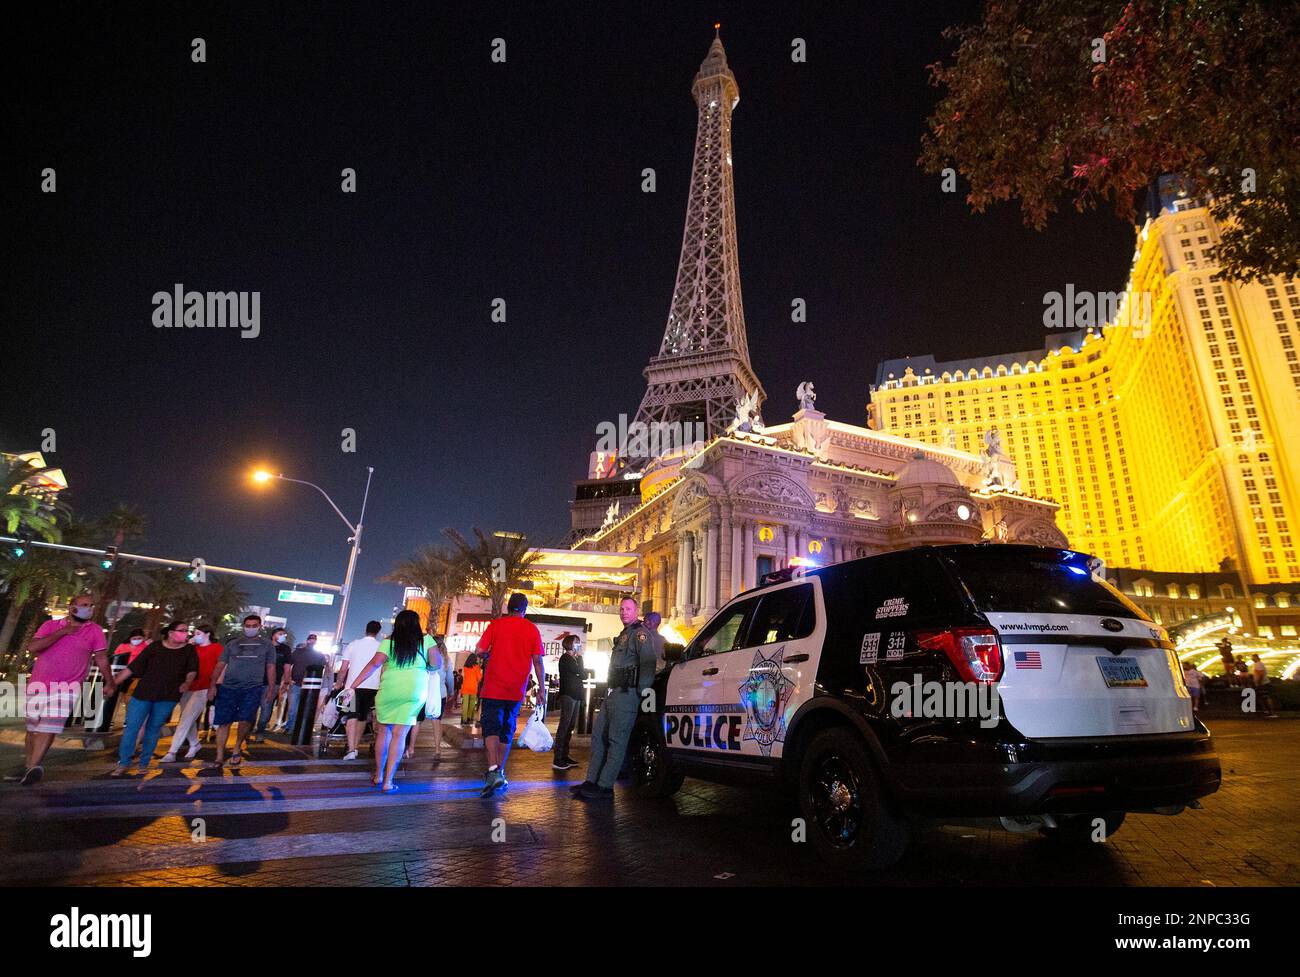 The exterior of the Paris hotel-casino in Las Vegas are lit up while the  inside remained dark from the mornings power outage, Thursday evening, Nov.  3, 2016. Elizabeth Page Brumley/Las Vegas Revie …